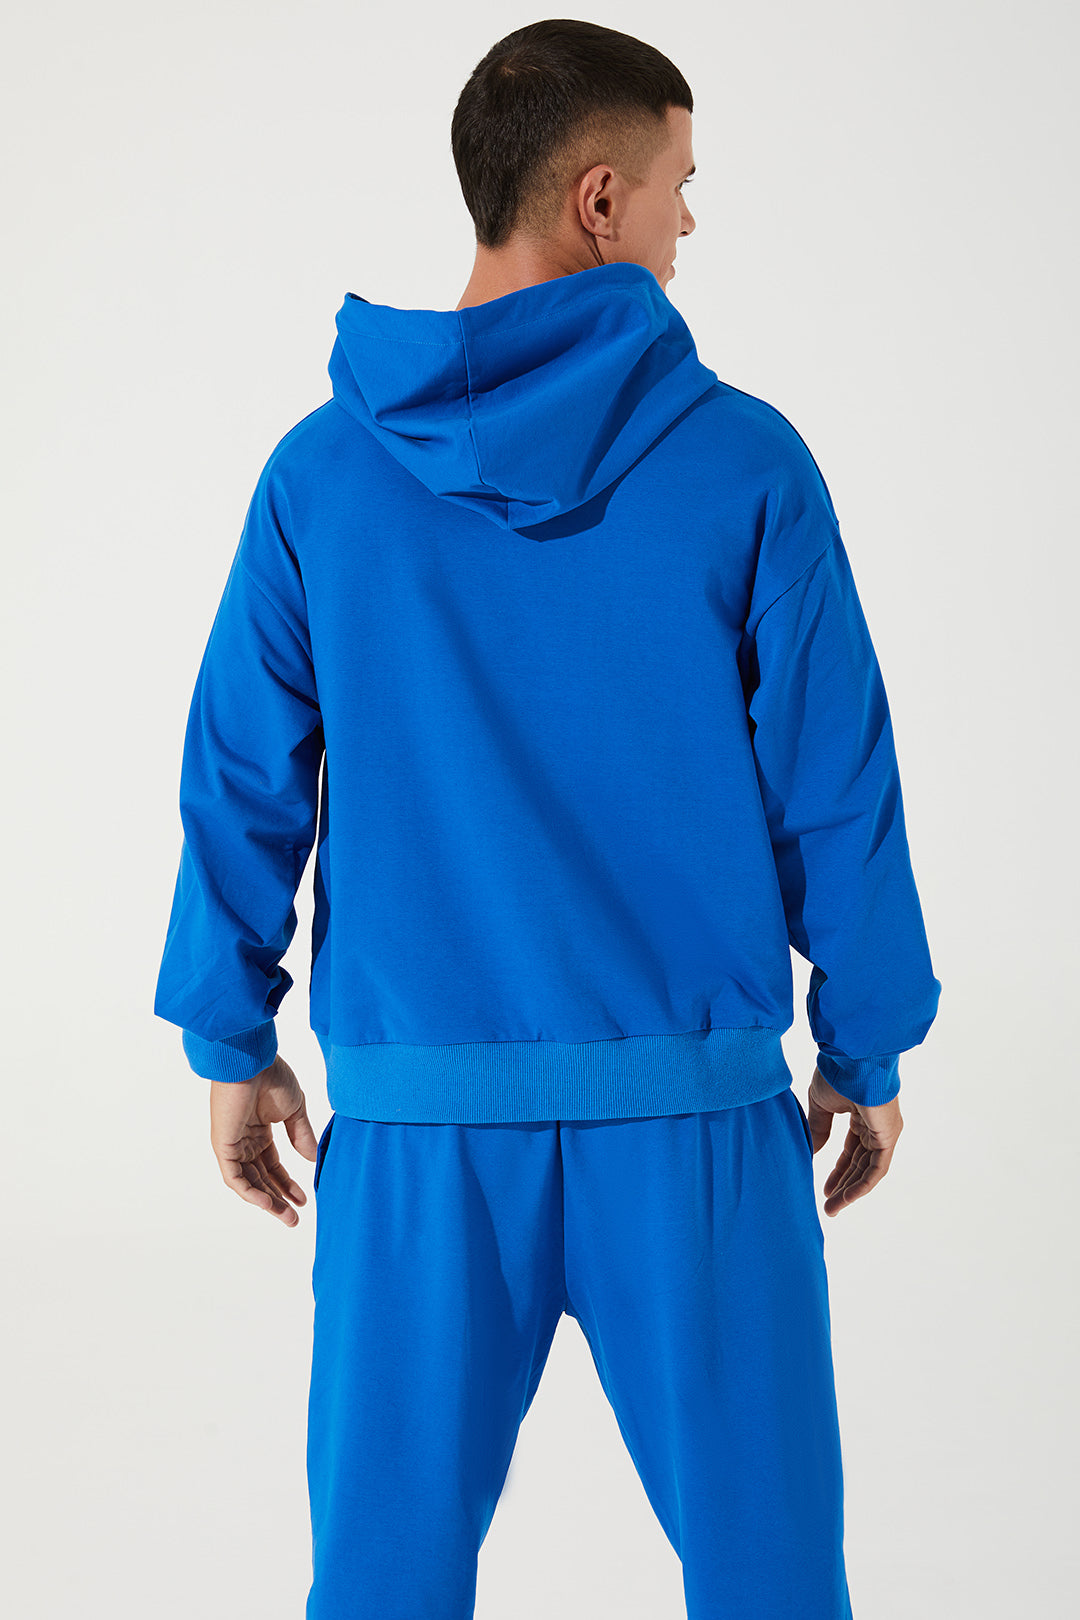 Men's hoodie in Atlantis blue, featuring a cropped design - OW-0033-MHO-BL - 4.jpg.